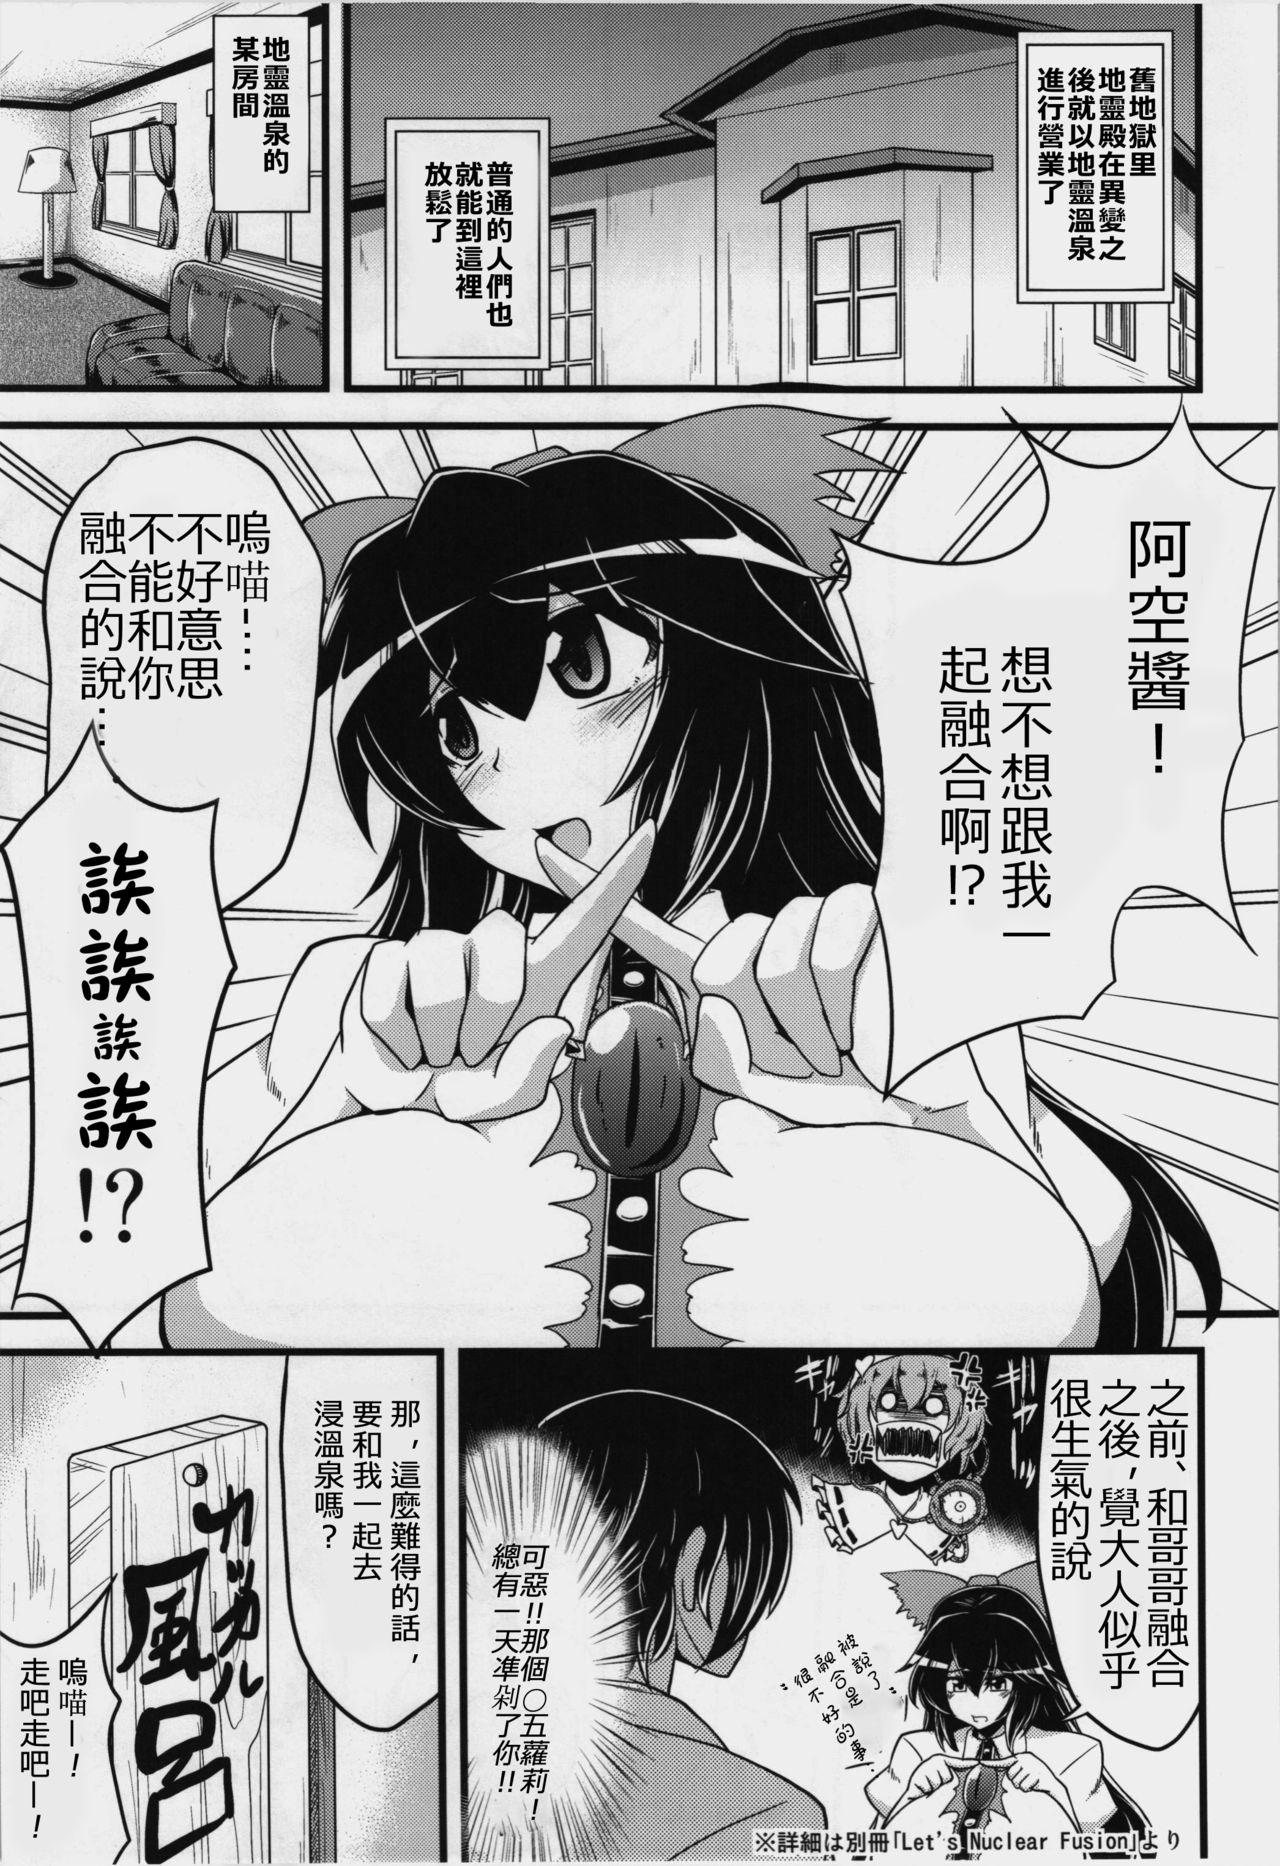 (Reitaisai 11) [CUNICULUS, Forever and ever... (Yositama, Eisen)] Double Unyuho (Touhou Project) [Chinese] [oo君の個人漢化] (例大祭11) [CUNICULUS、Forever and ever... (英戦、ヨシタマ)] だぶるうにゅほ (東方Project) [中国翻訳]